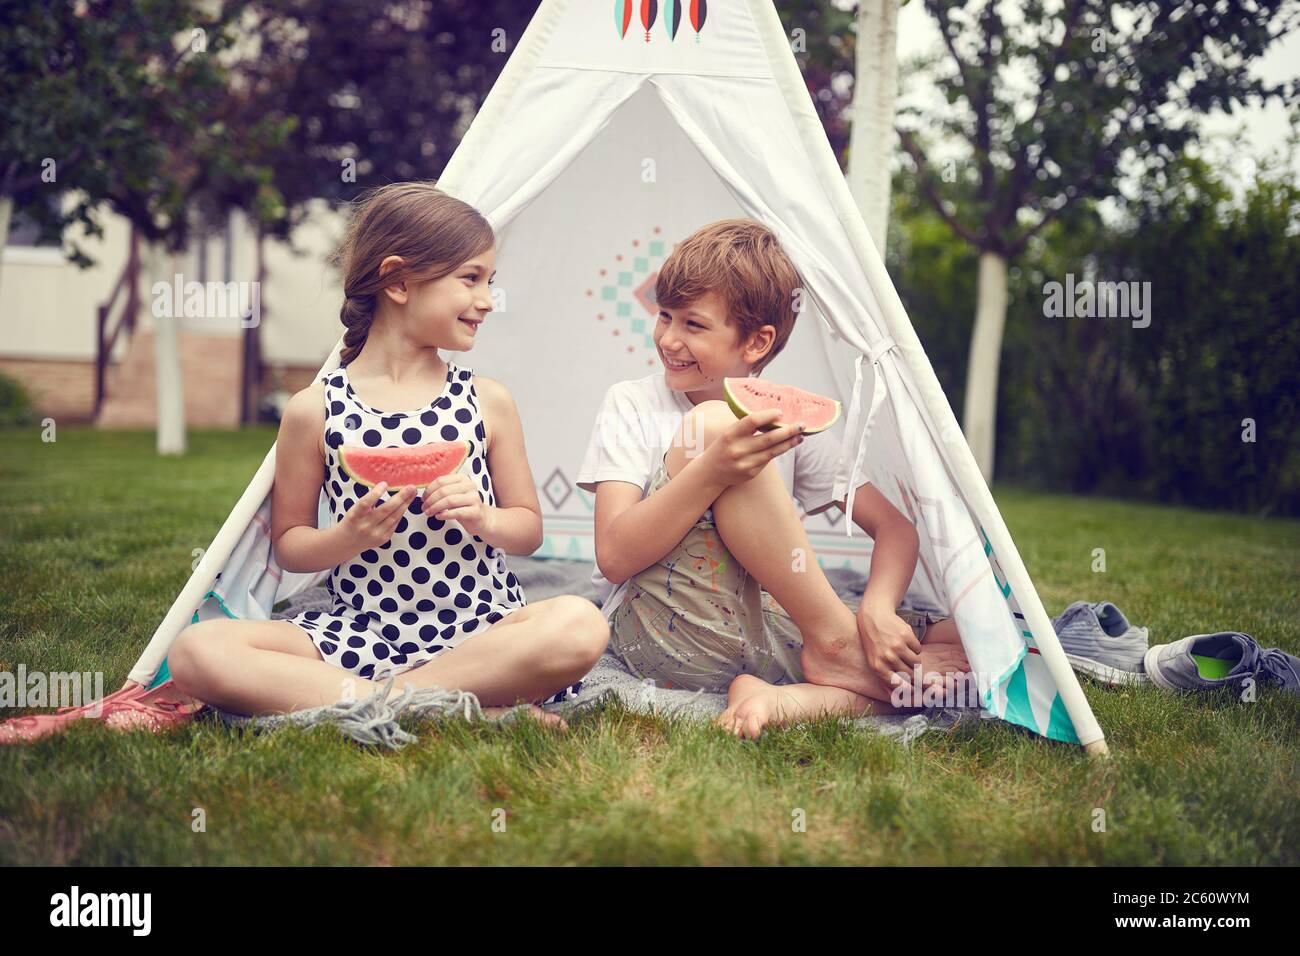 Summer time fun. Smiling boy and girl  at backyard in teepee and eats watermelon. Stock Photo